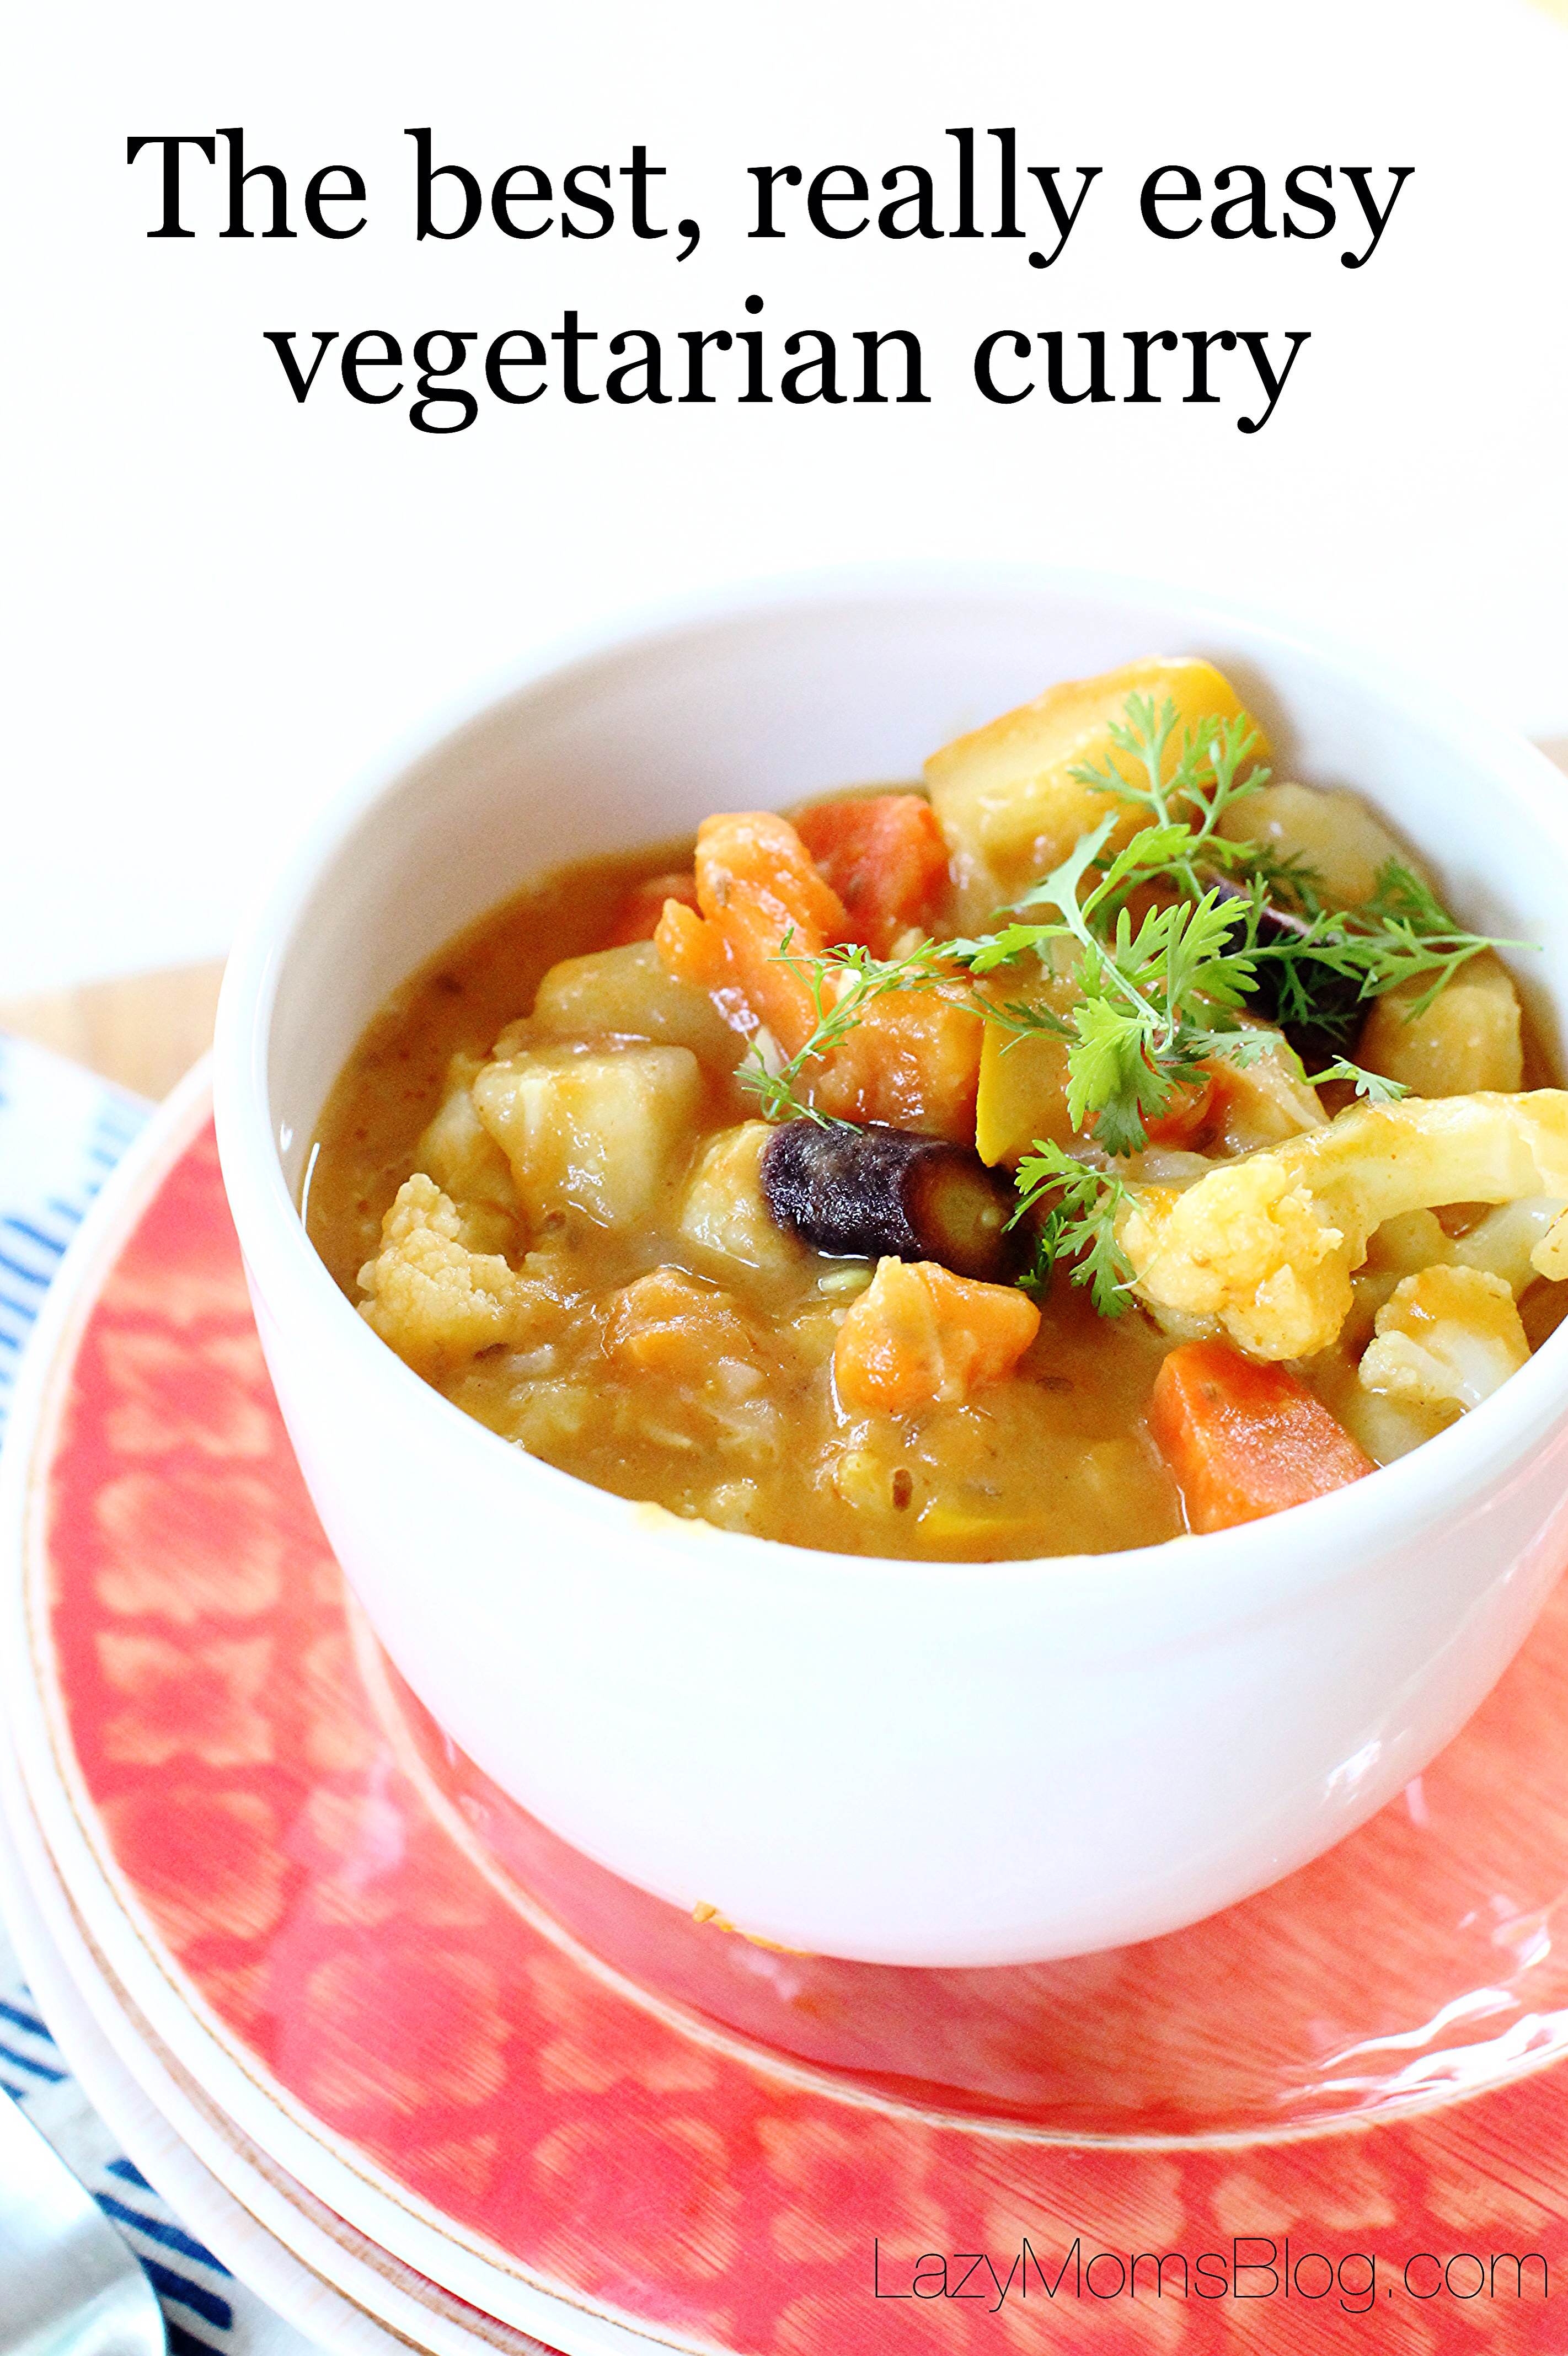 This vegetarian curry is so full of flavor and texture, while being healthy, comforting and so easy to make! Definitely a family favorite! 